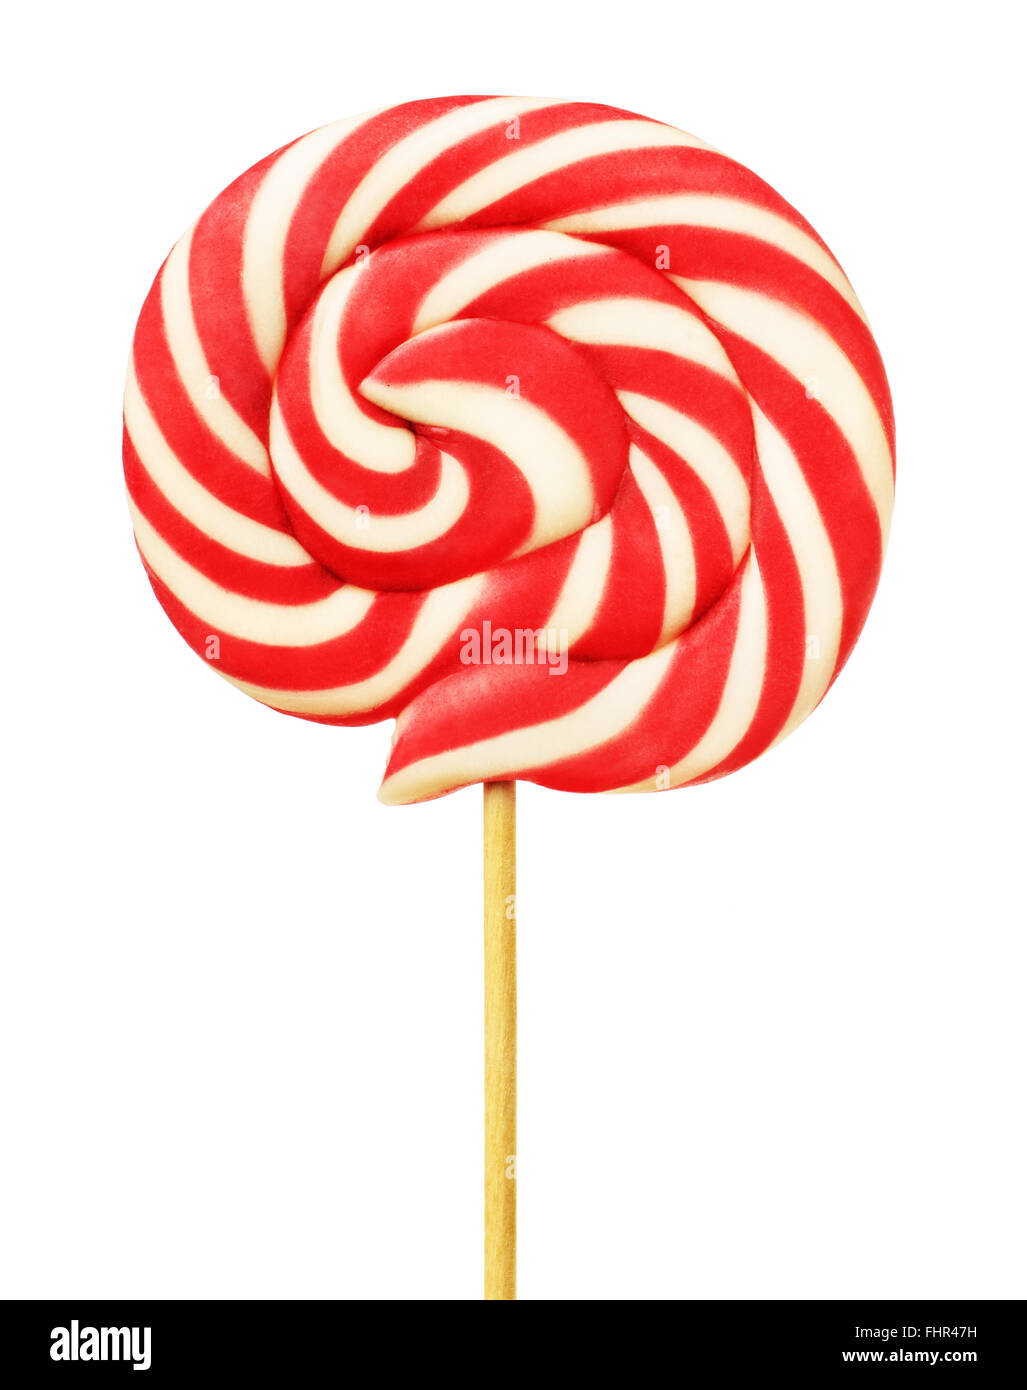 Red and white round spiral lollipop isolated on a white background Stock Photo